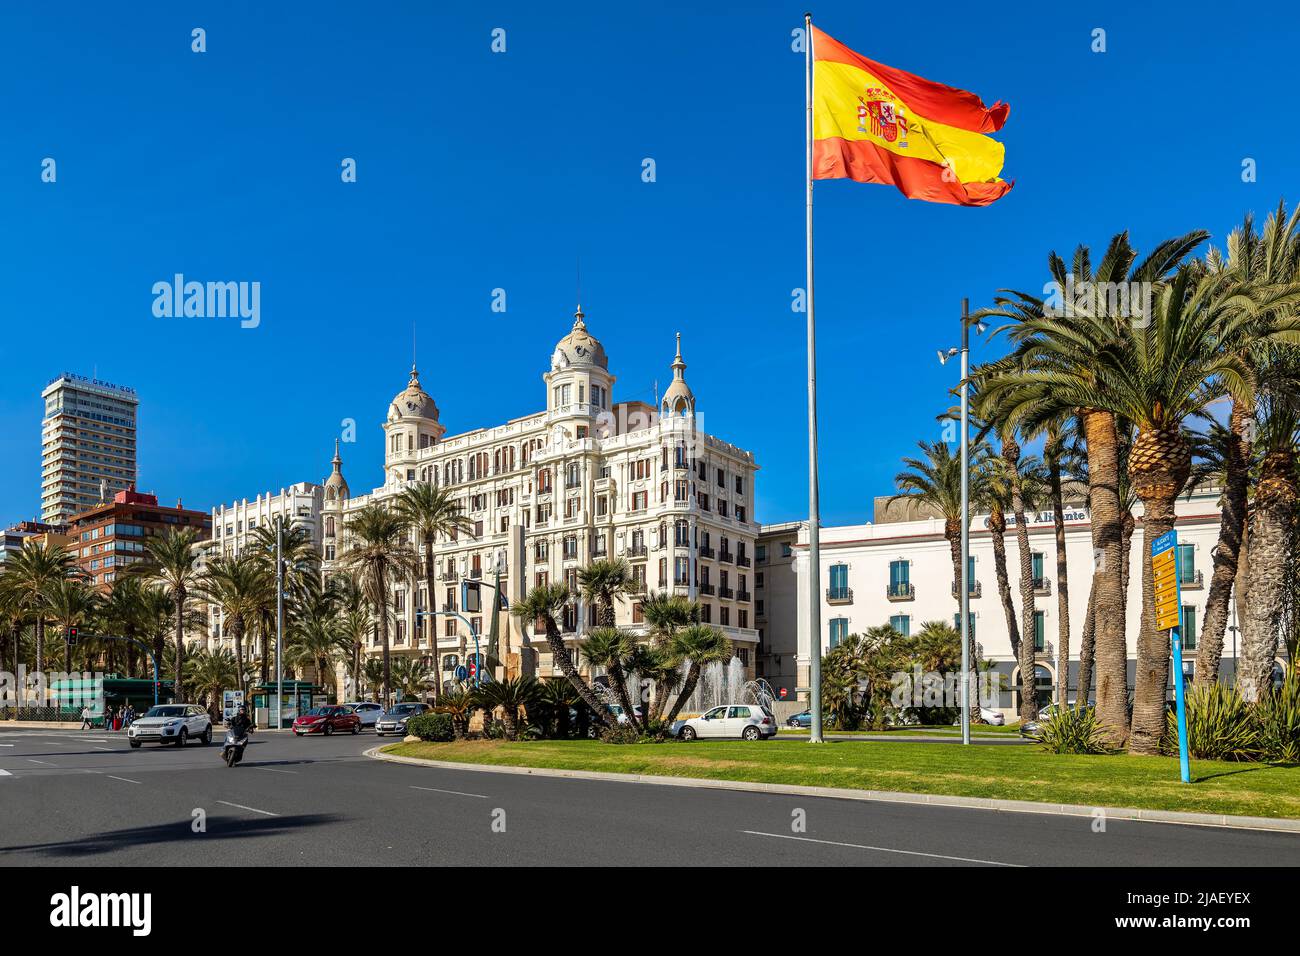 Spanish flag waving under blue sky in Placa del Mar - one of the main city squares of Alicante, Spain. Stock Photo